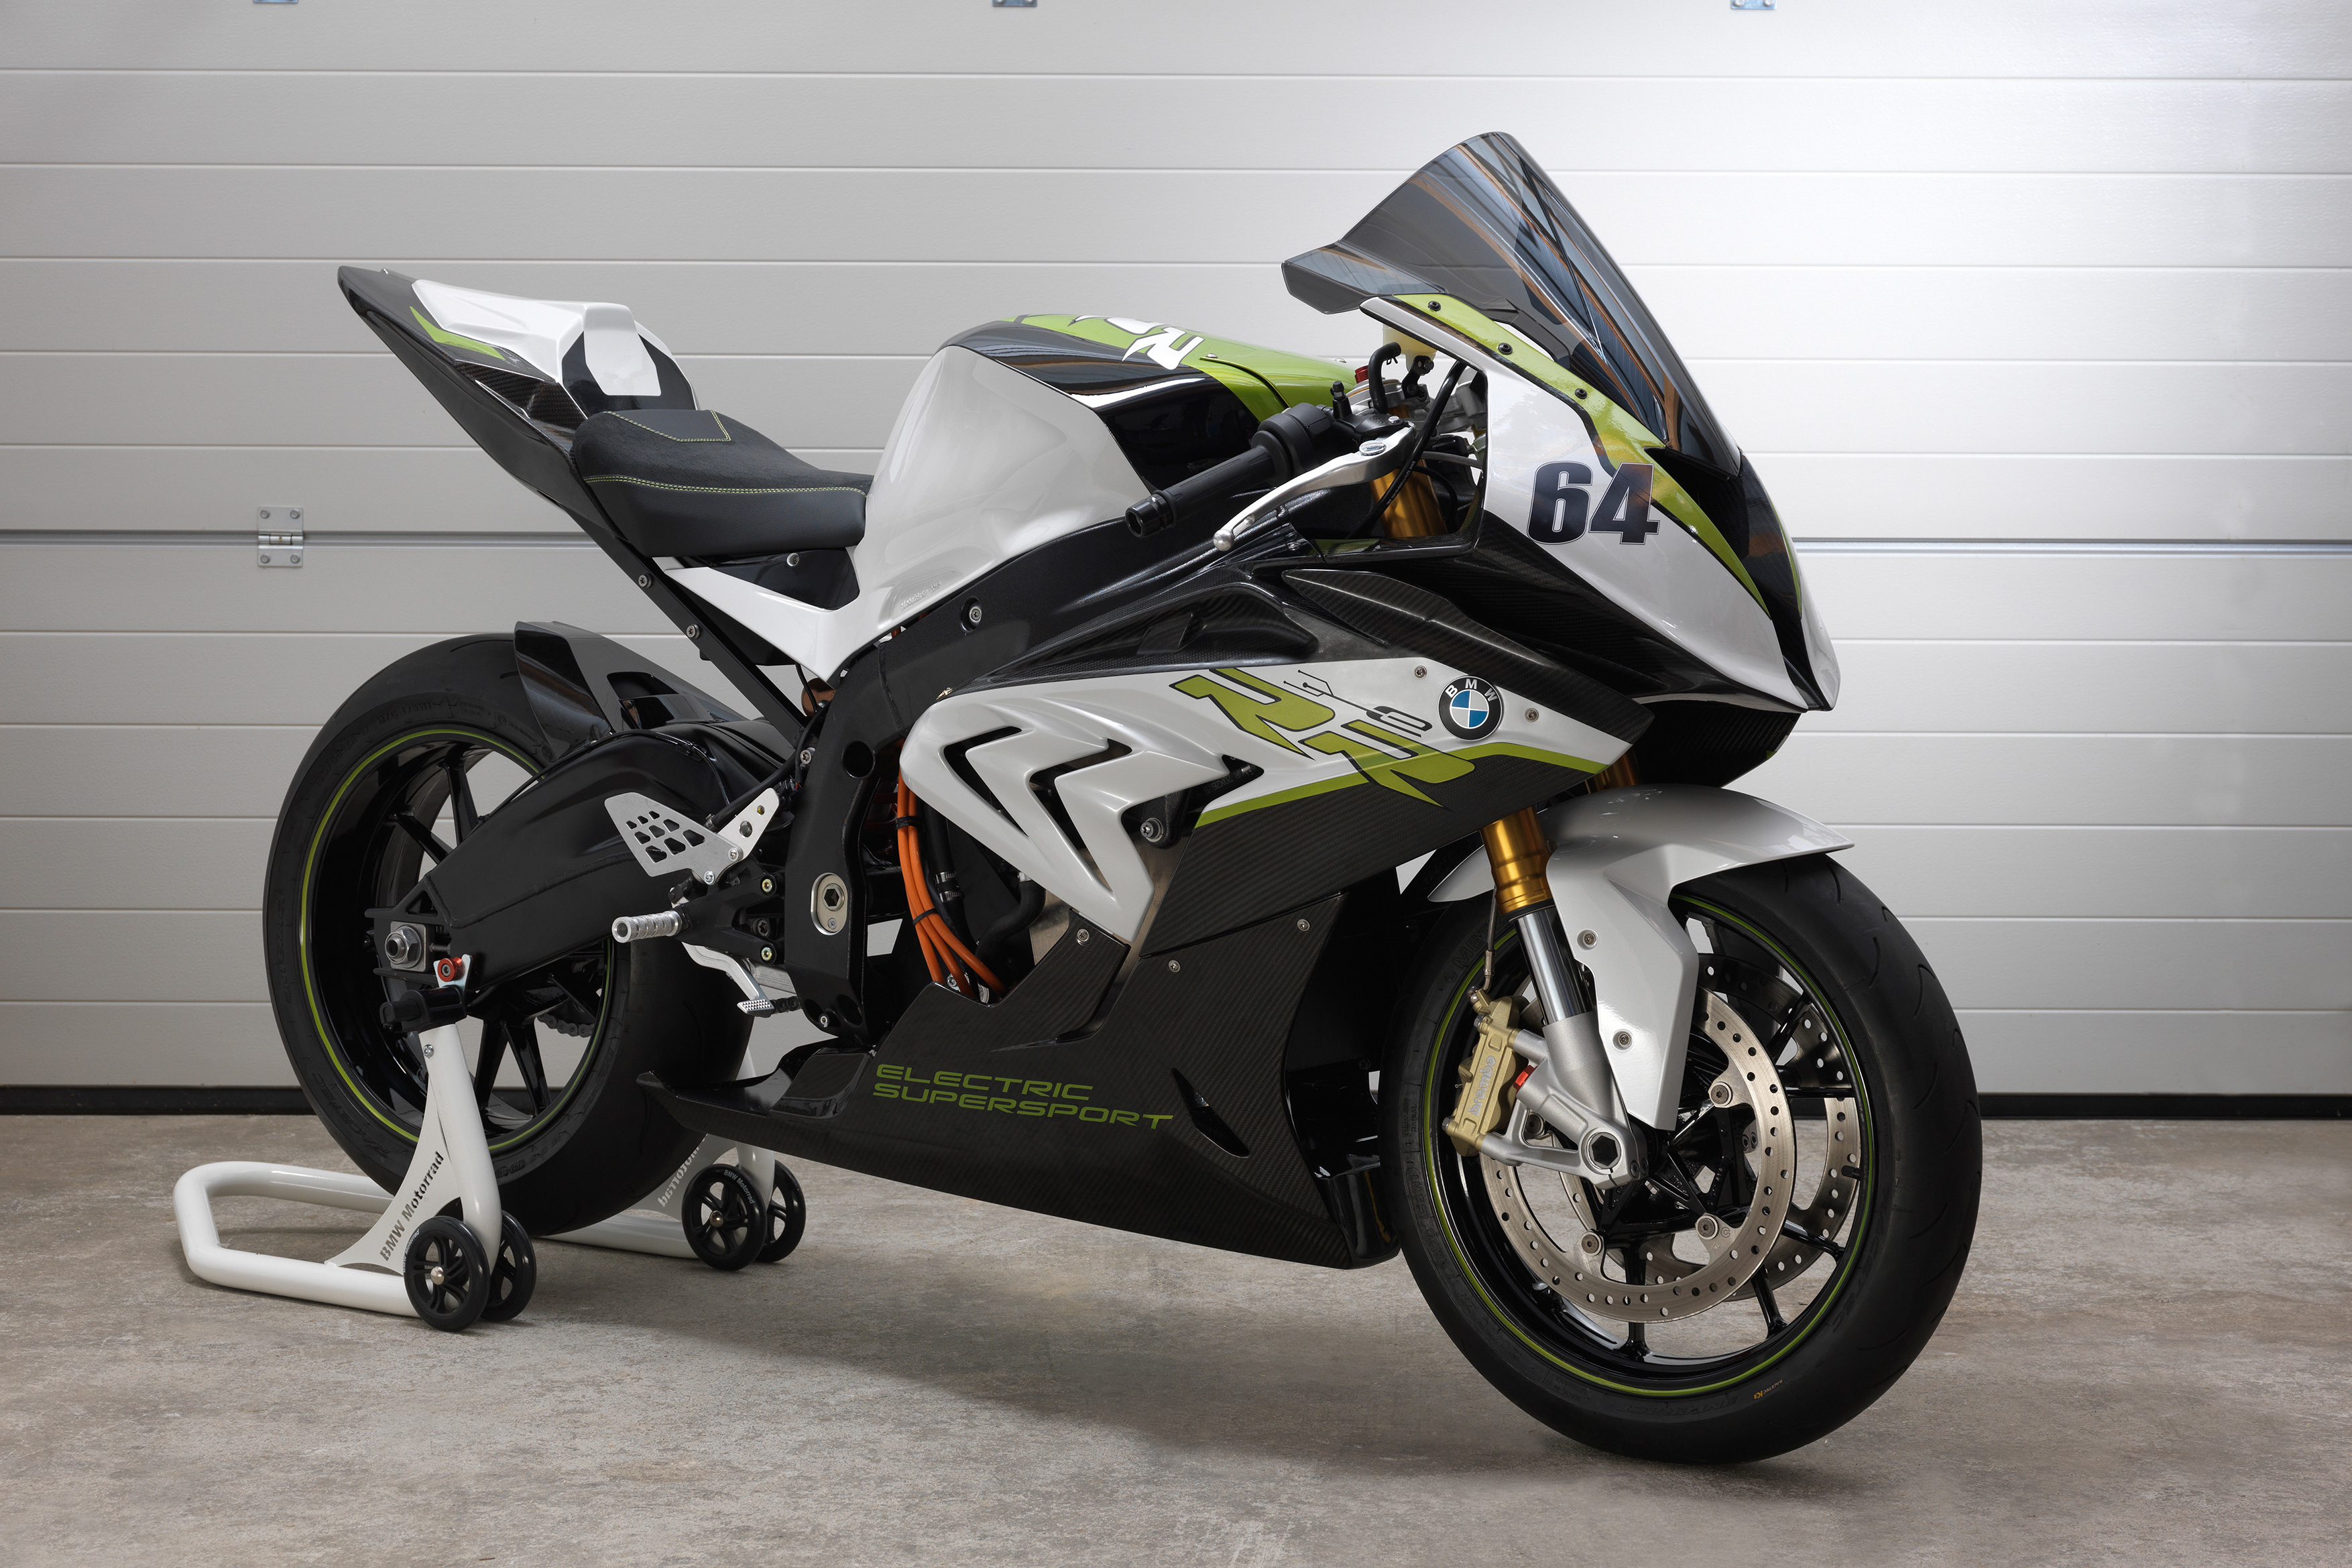 BMW's electric S1000RR revealed